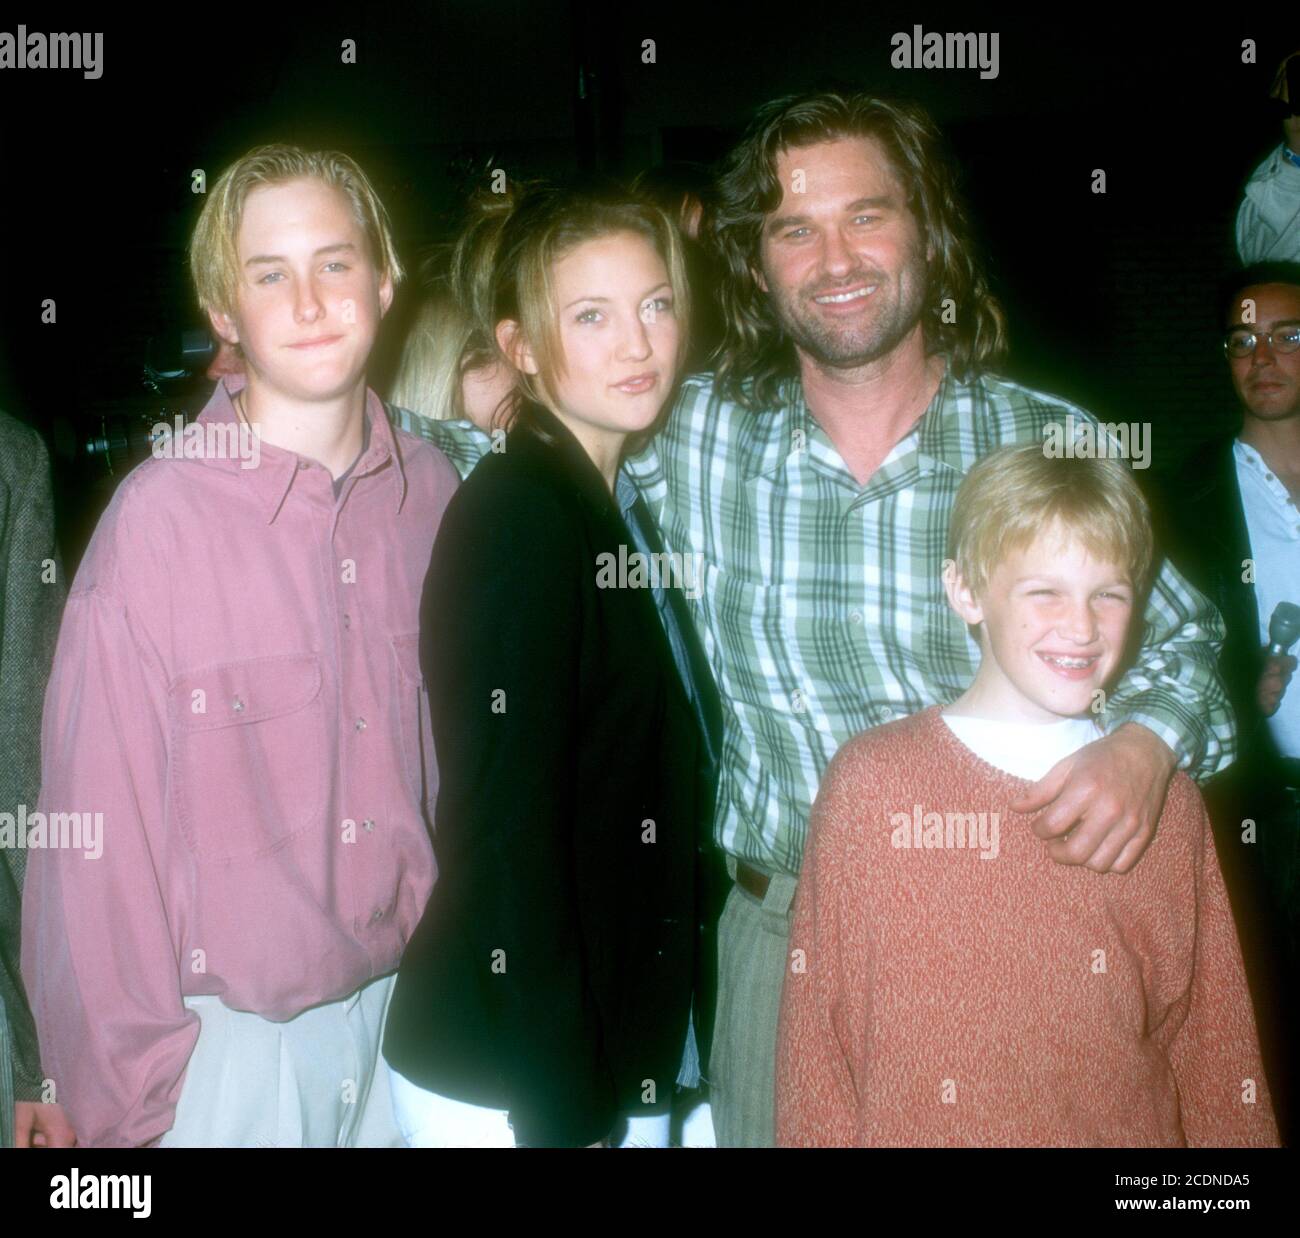 Westwood, California, USA 11th March 1996 (L-R) Boston Russell, Actress Kate Hudson, actor Kurt Russell and son Wyatt Russell attend Warner Bros. Pictures' 'Executive Decision' Premiere on March 11, 1996 at Mann Village Theatre in Westwood, California, USA. Photo by Barry King/Alamy Stock Photo Stock Photo